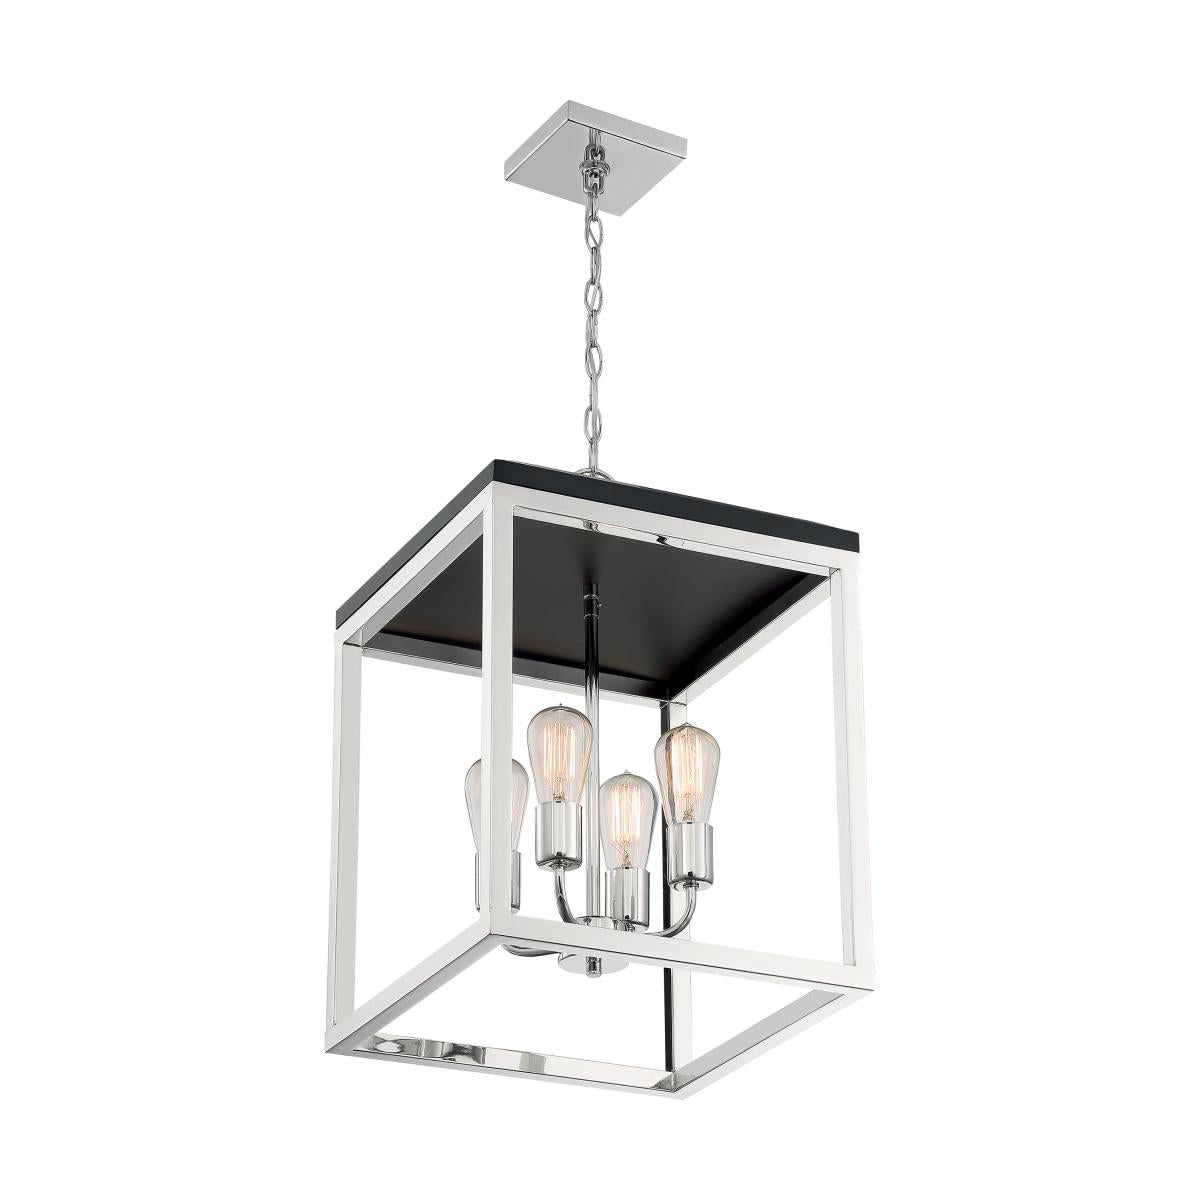 Cakewalk 4 Light Pendant with Polished Nickel and Black Accents Finish